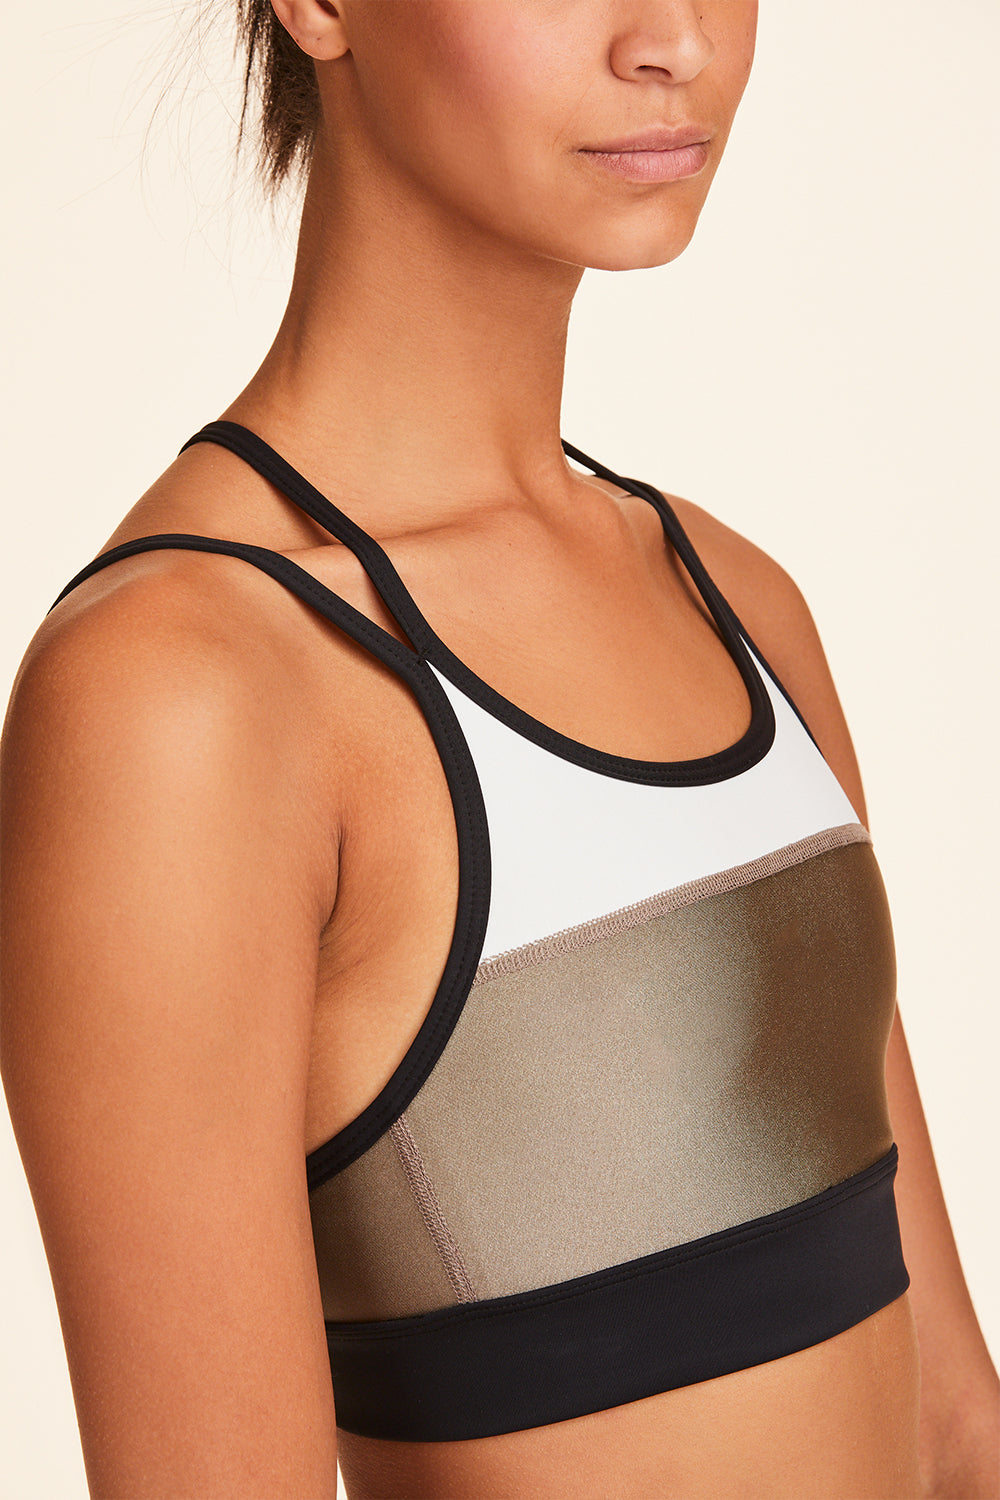 3/4 view of Alala Women's Luxury Athleisure blocked sports bra with criss-crossed straps in gold, white, & black